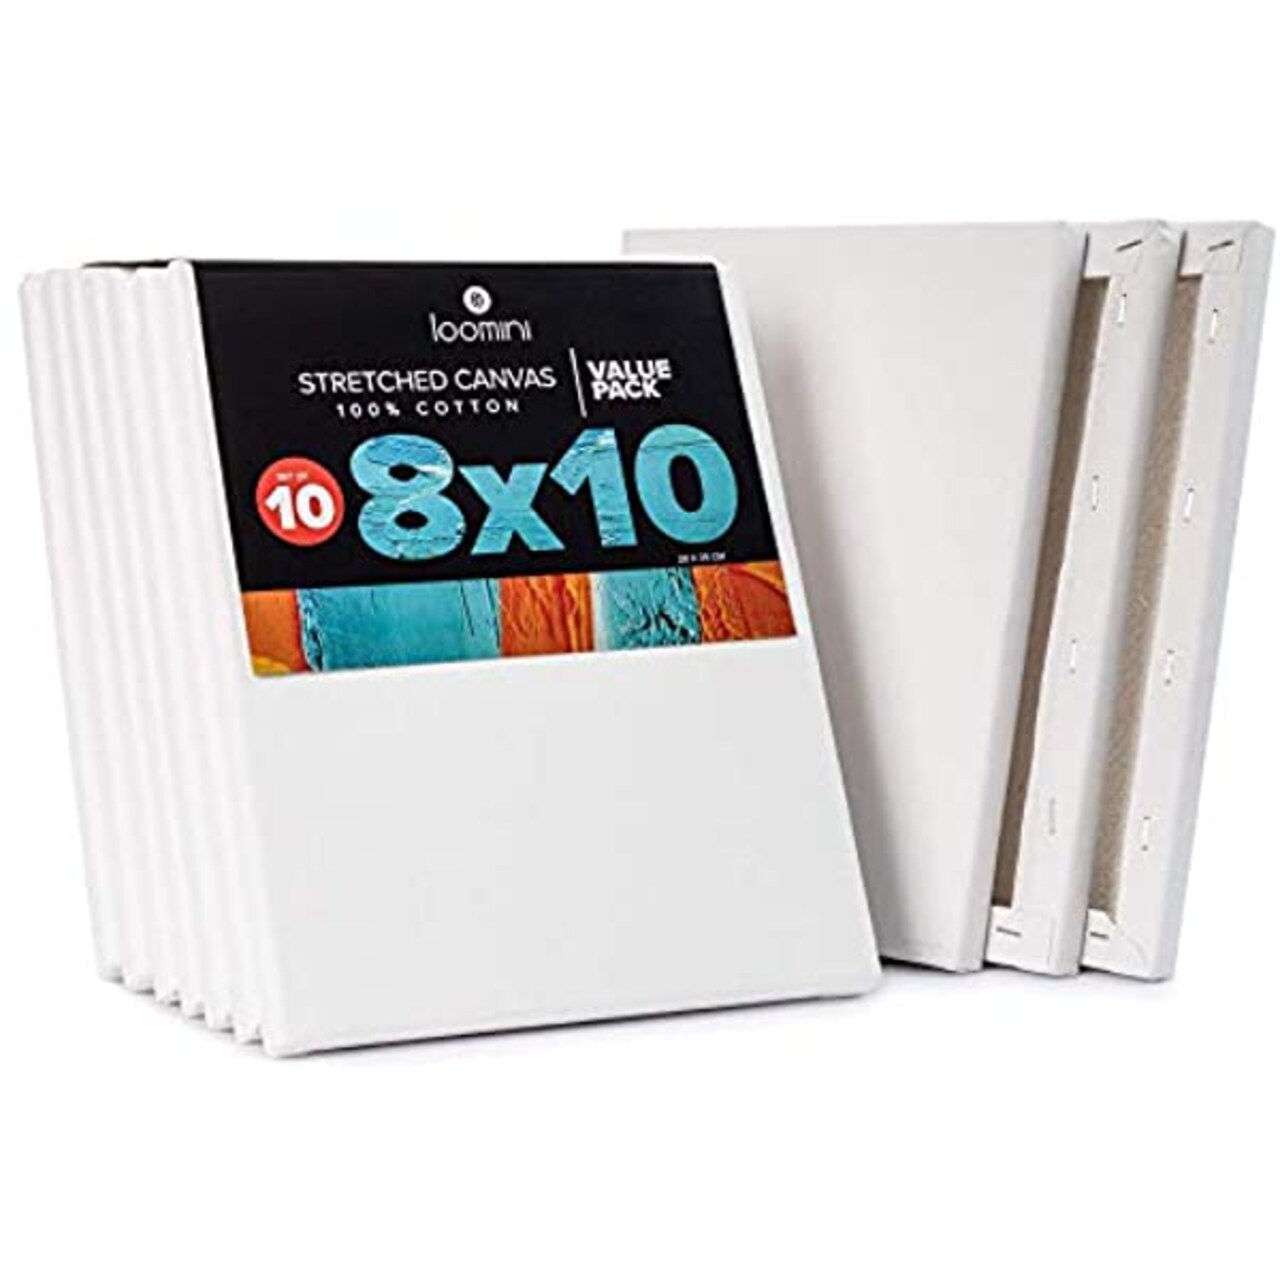 Stretched Canvas Panels for Painting 10 pack 8x10- Professional Grade Surface for Artists